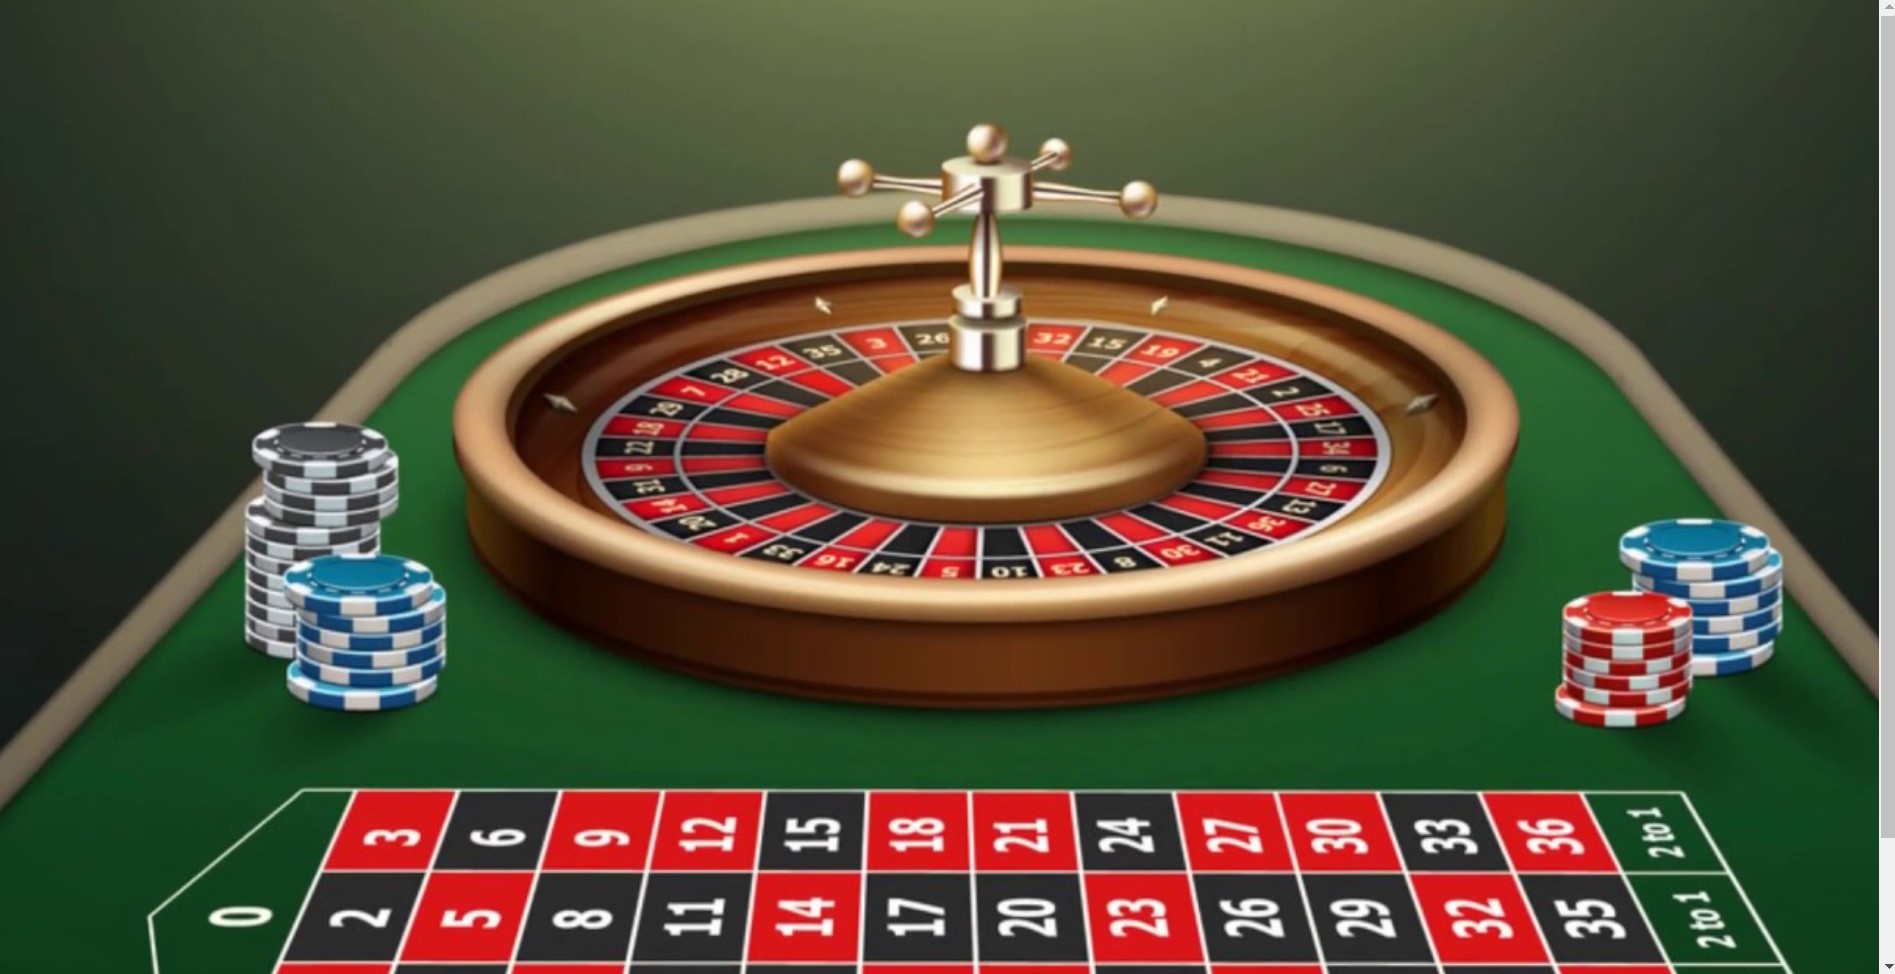 Types of roulette in casinos and what are their main differences